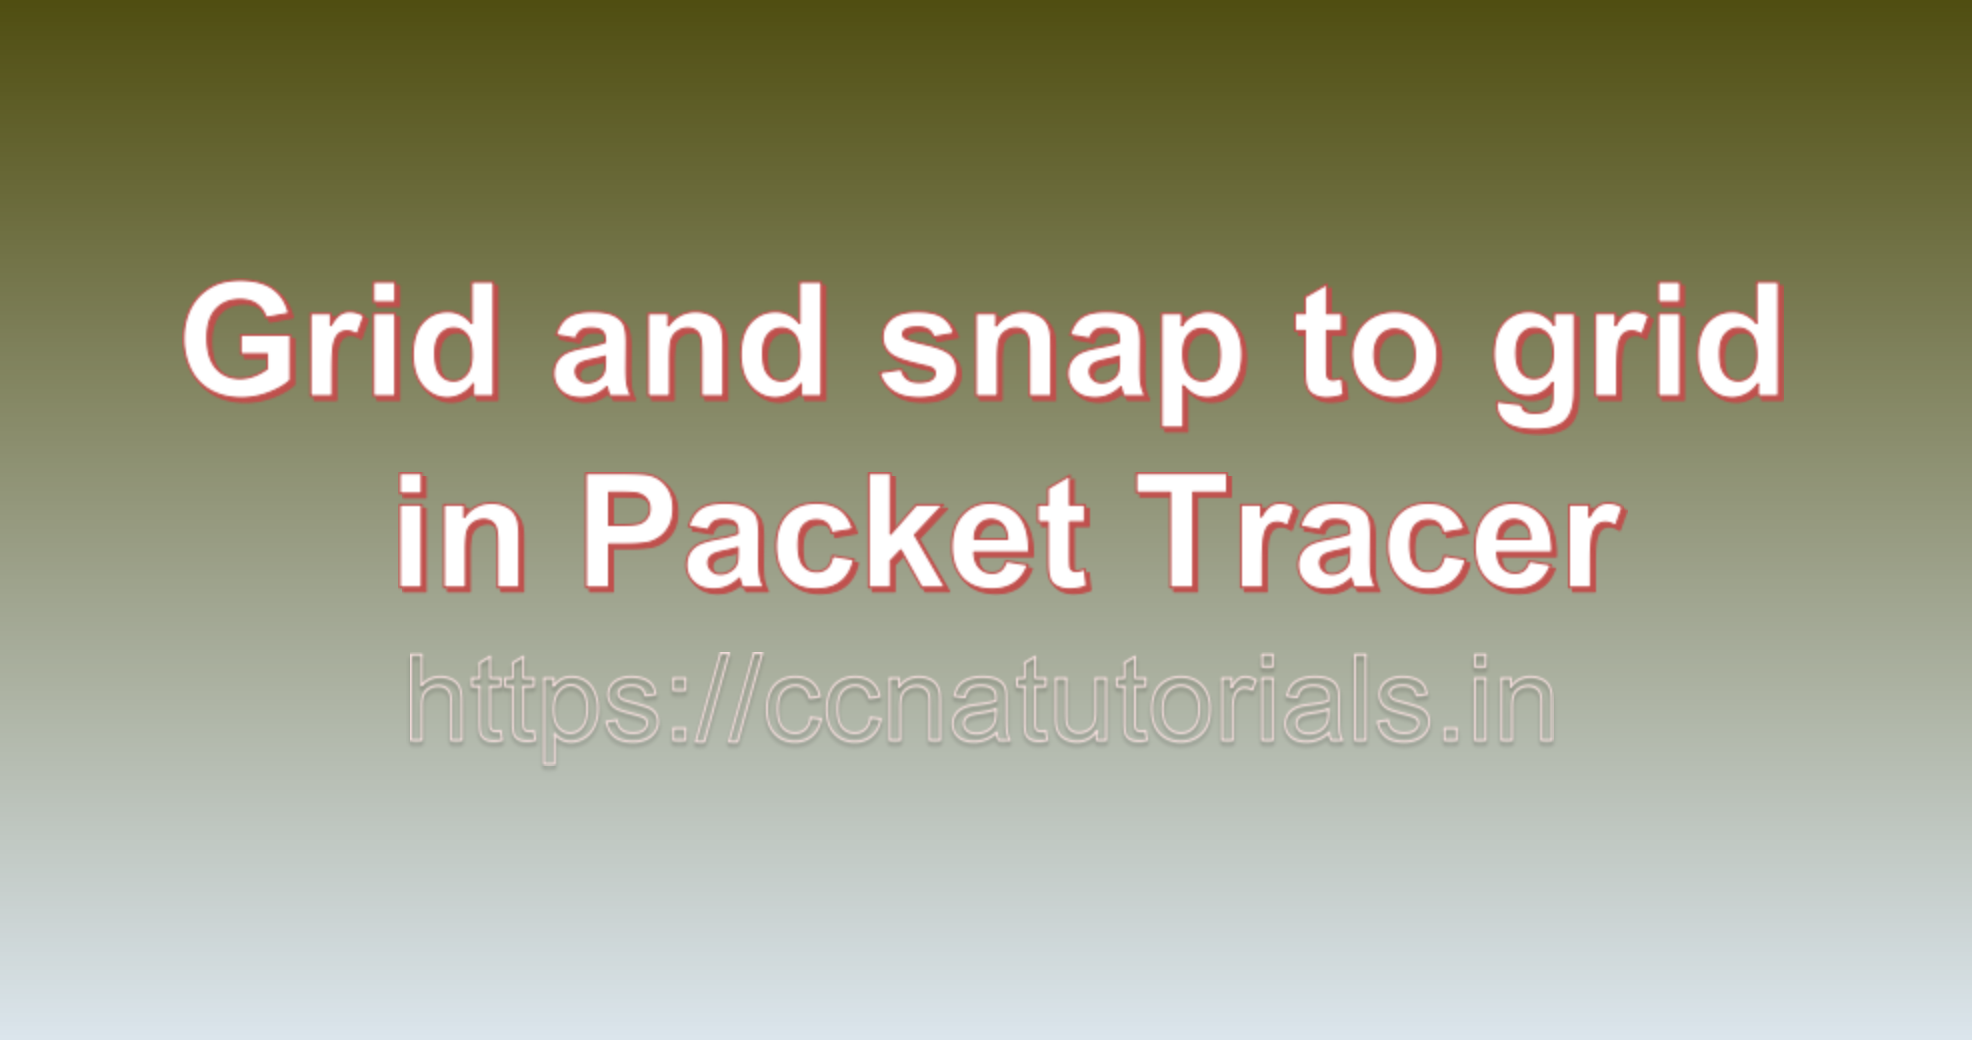 Grid and snap to grid in Packet Tracer, ccna, ccna tutorials